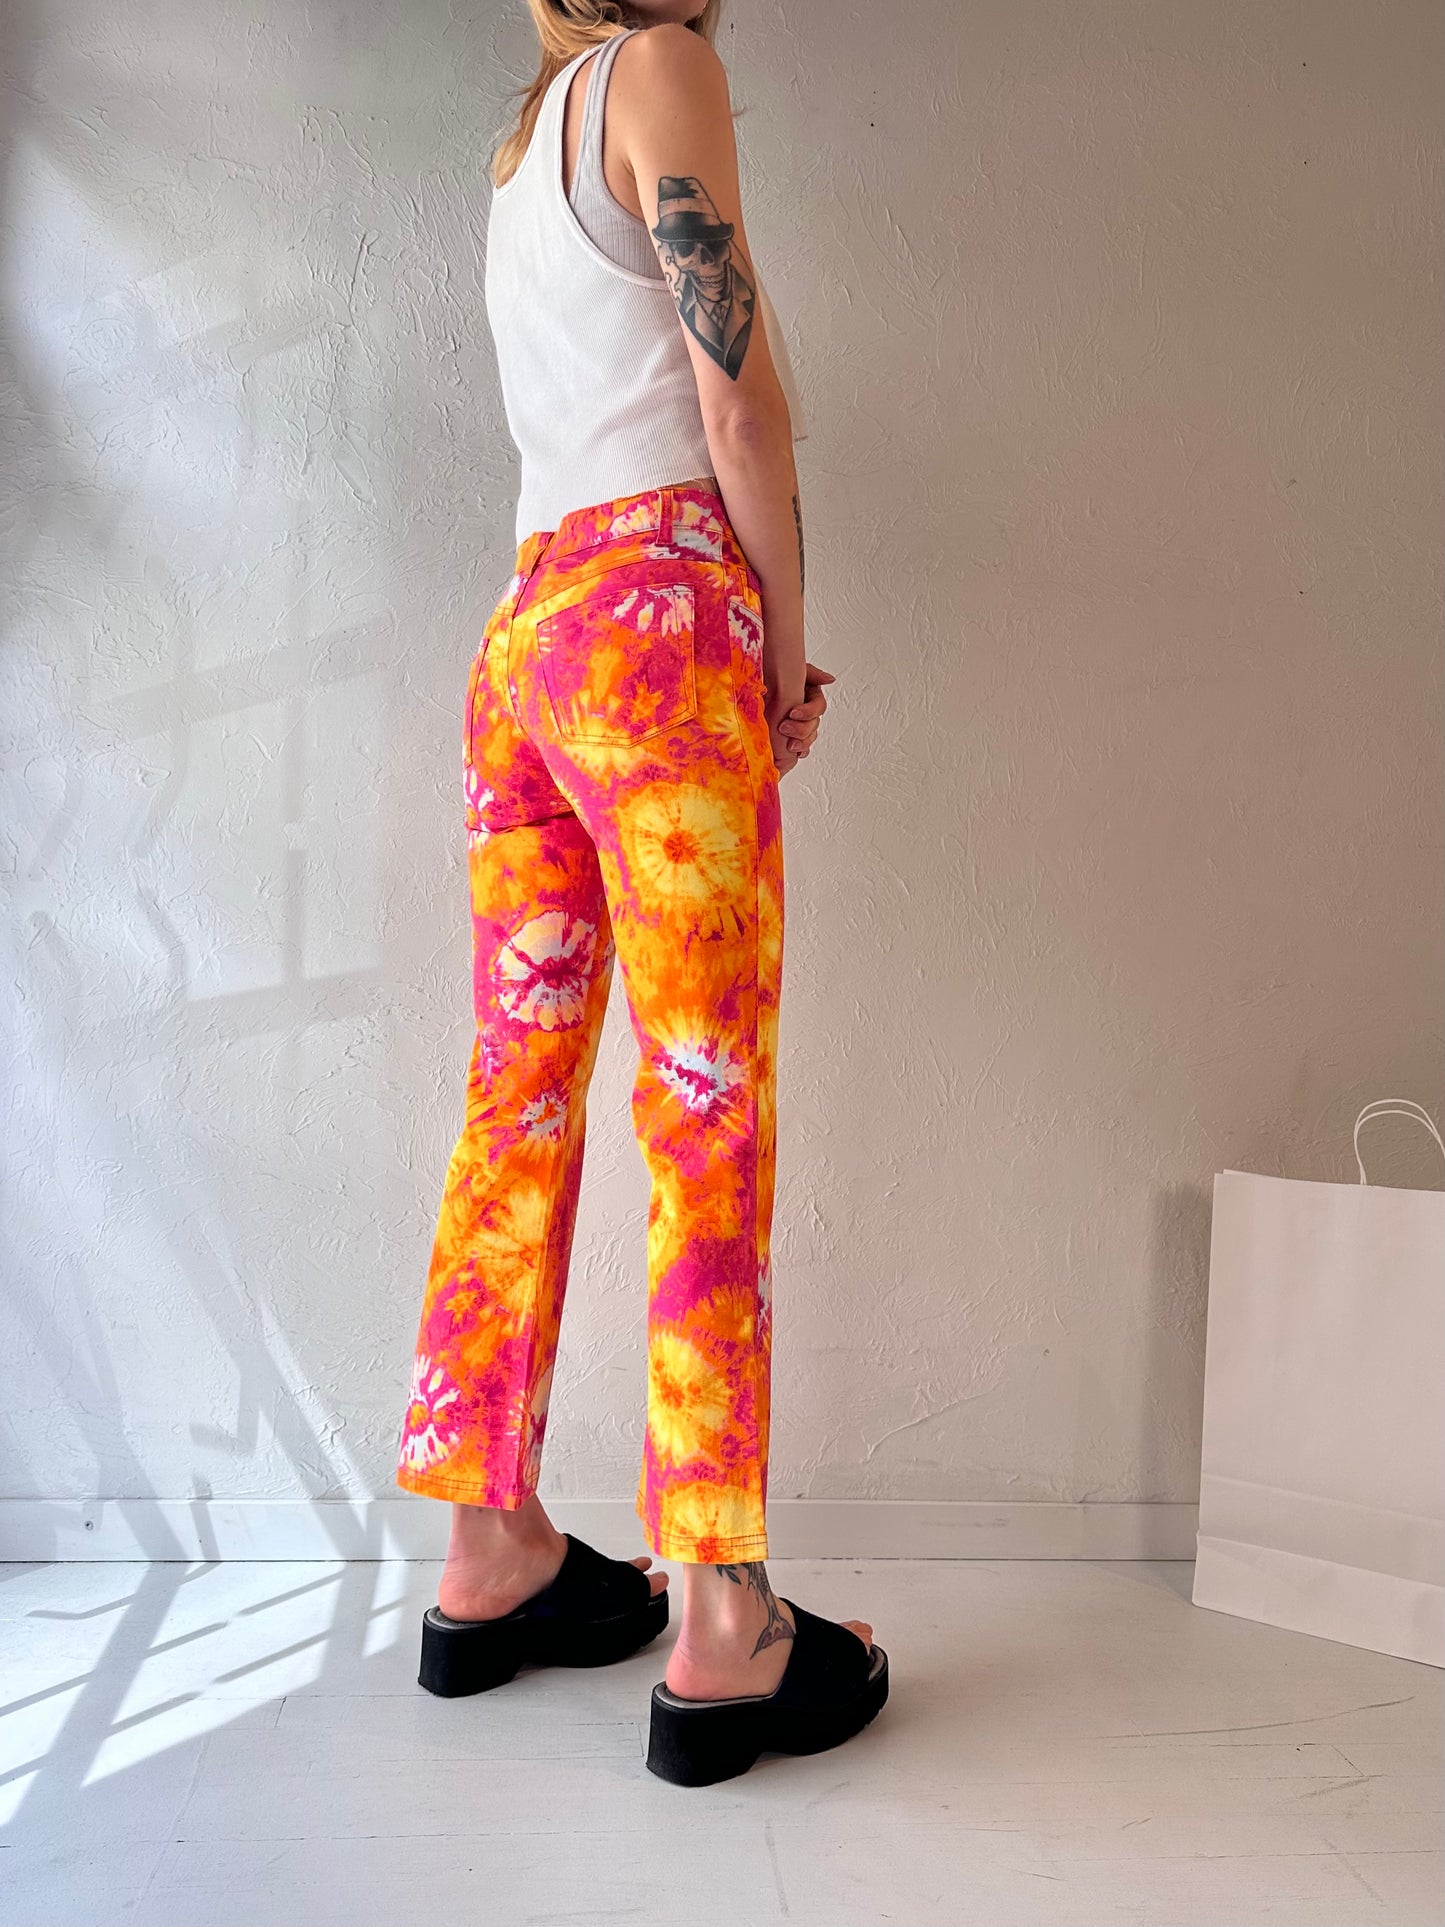 90s 'Route 66' Tie Dye Pants / Small